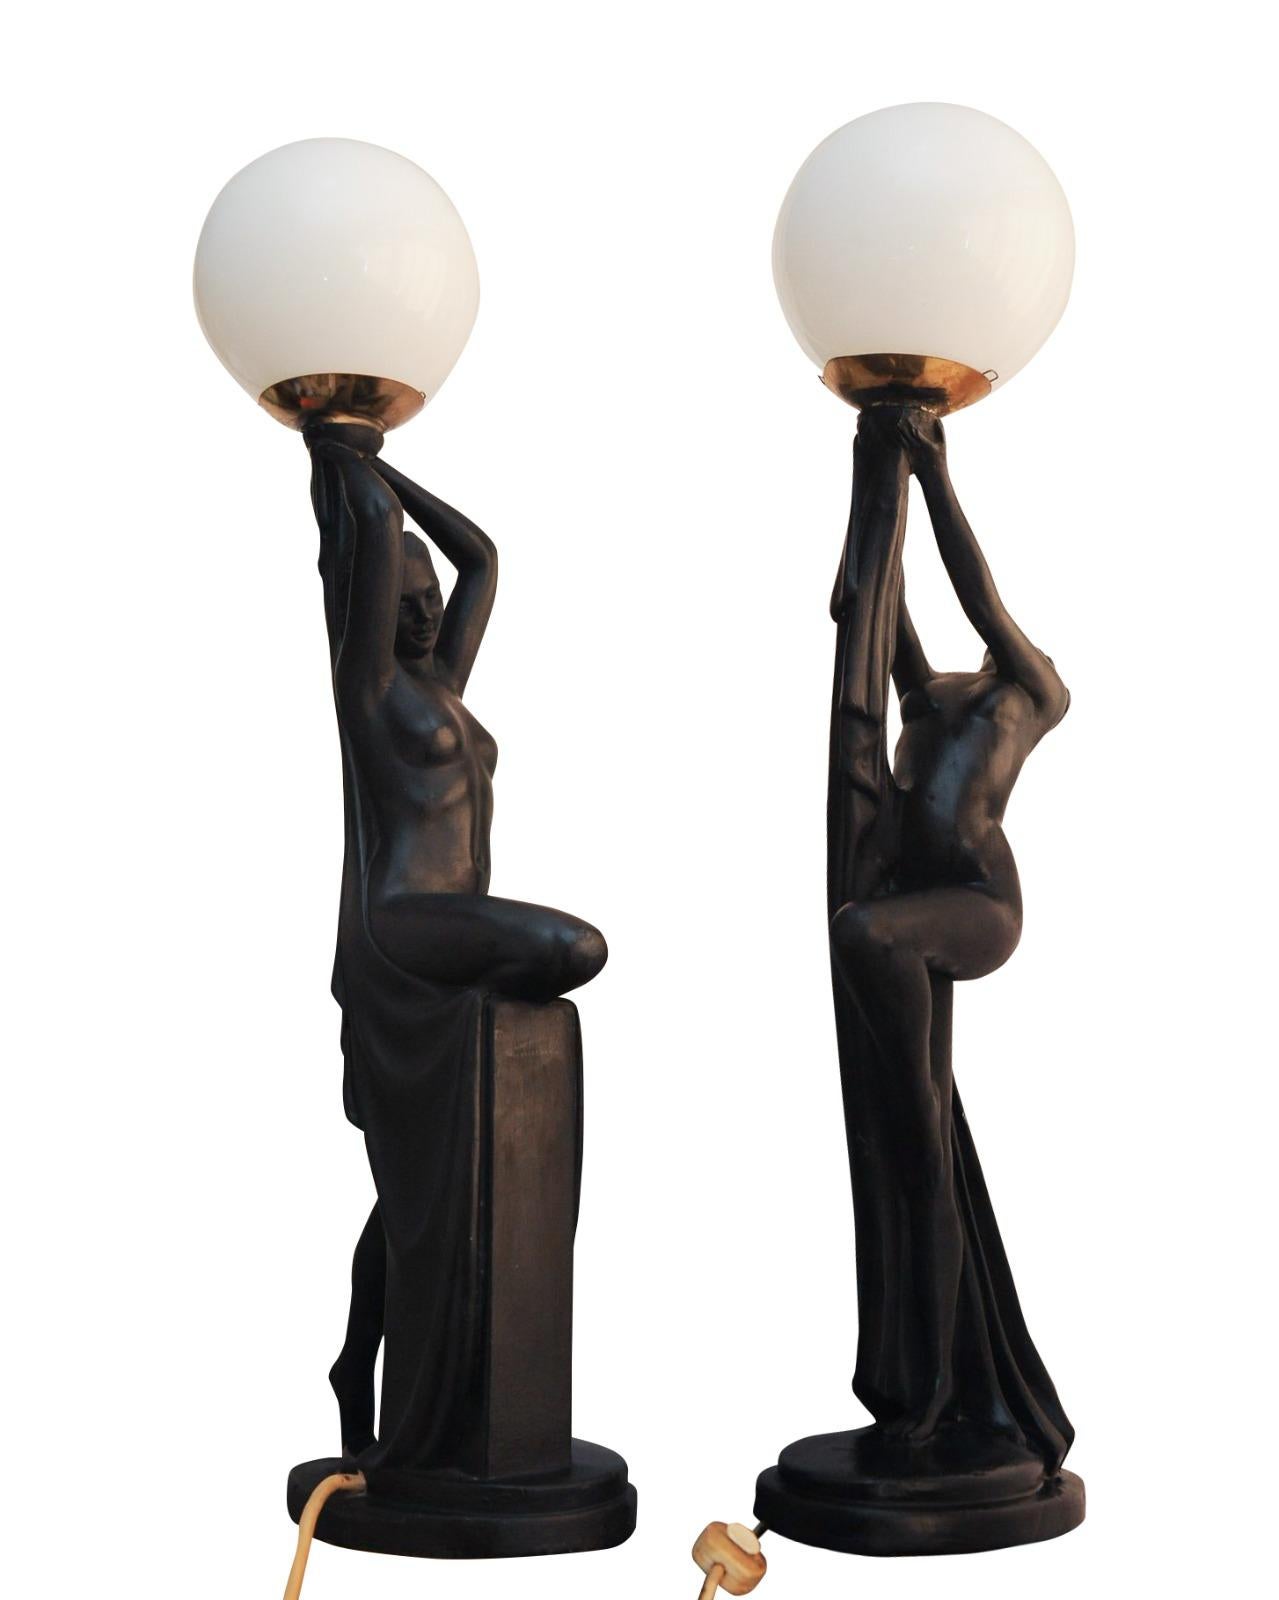 Pair of Exquisite Art Deco Ebonized Plaster Nude Feminine Form Table Lamps 1930s In Good Condition For Sale In High Wycombe, GB